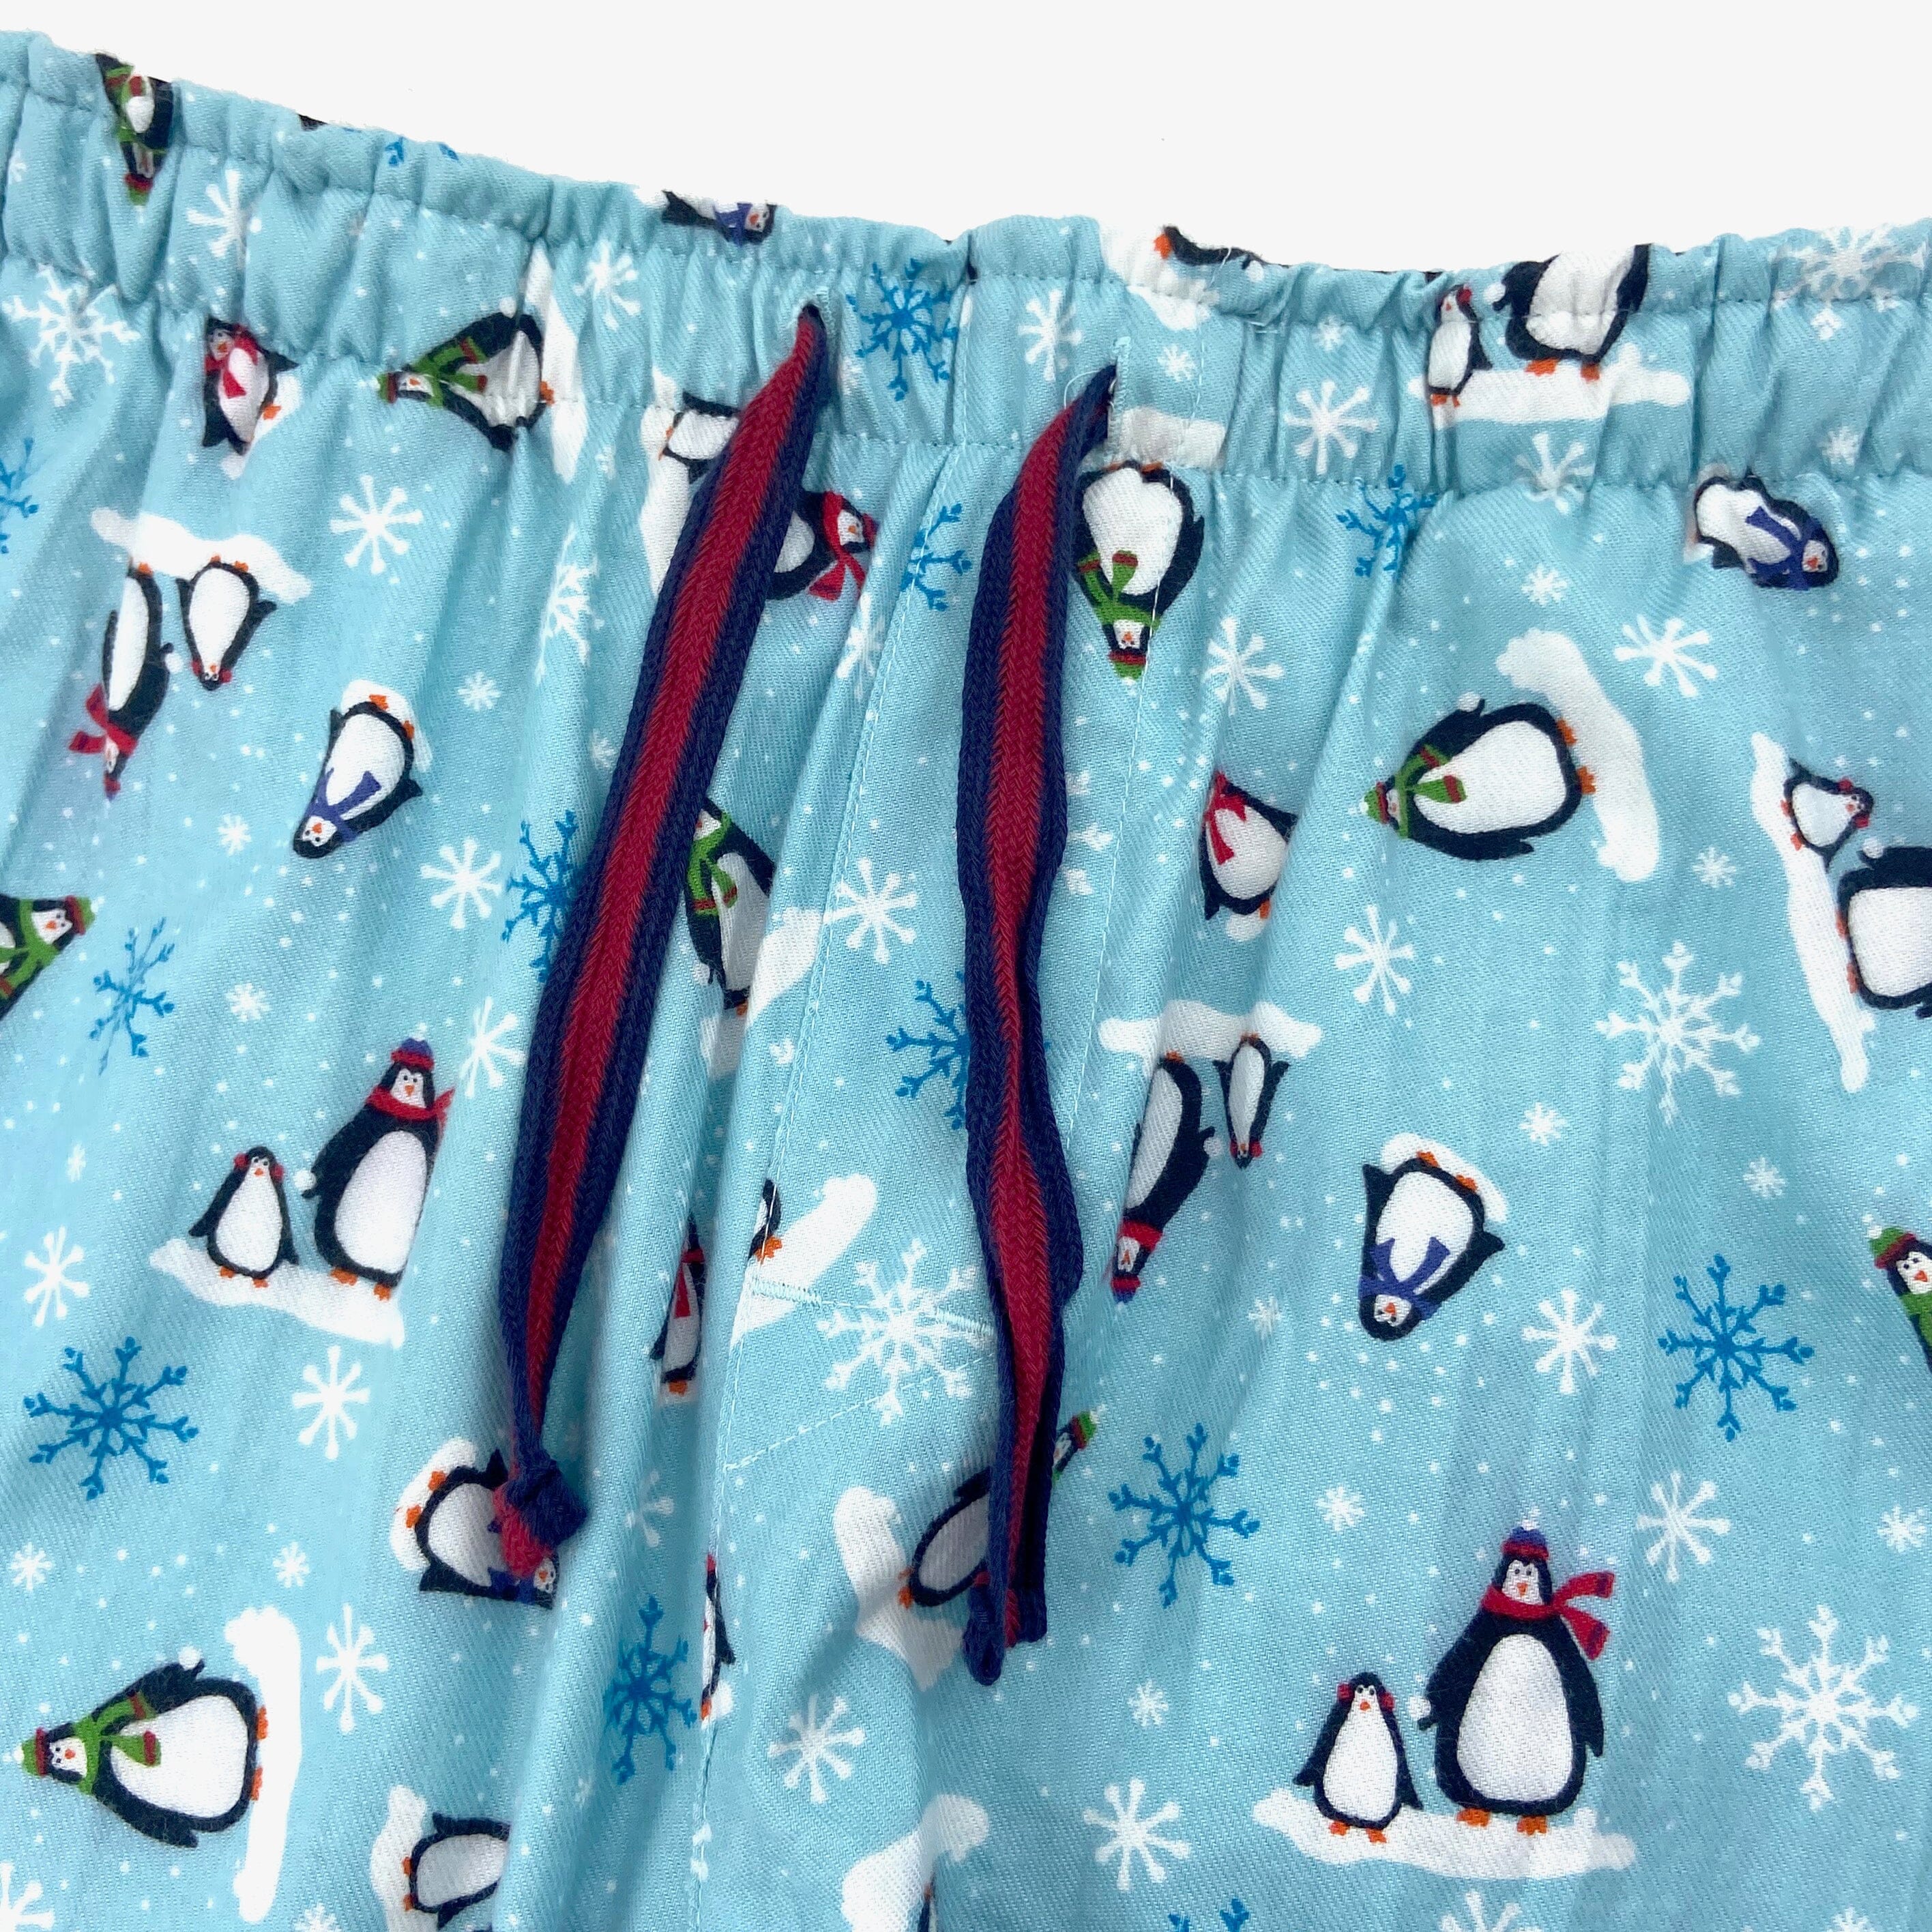 Men's Light Blue Long Pajama Pant Bottoms with Penguin All Over Print